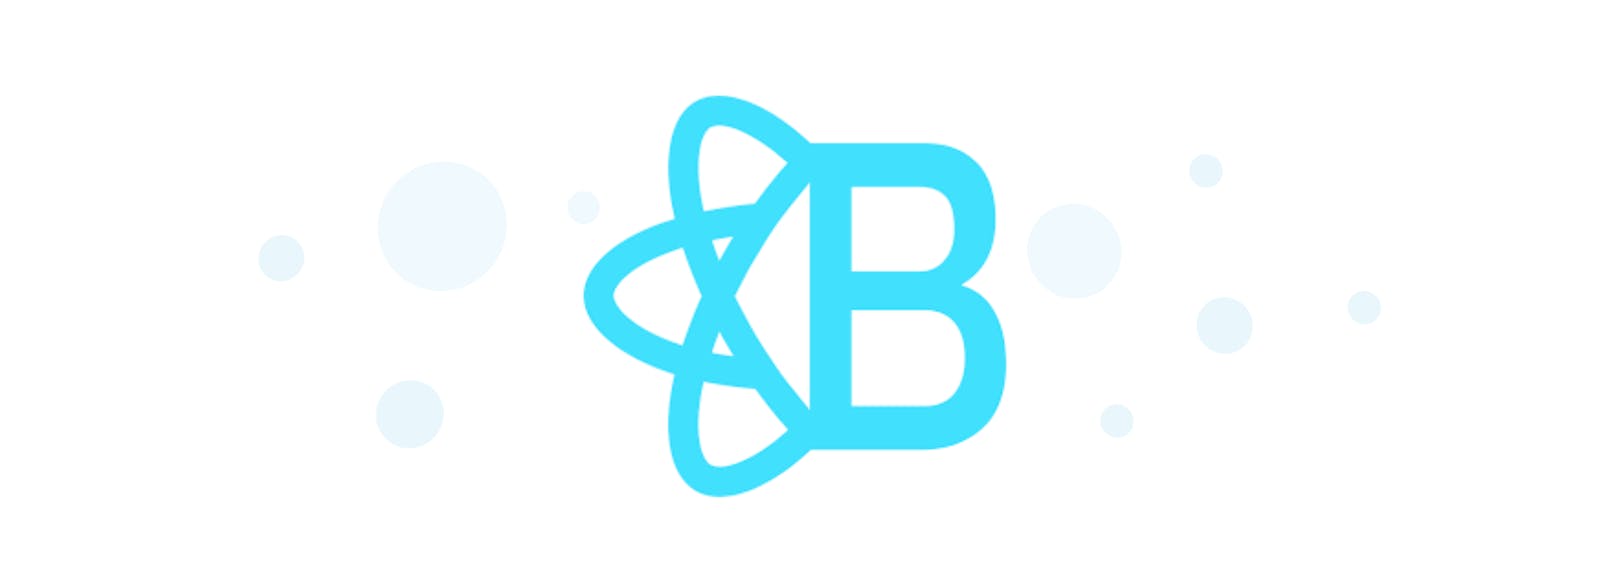 Understanding React-Bootstrap and Putting It to Use